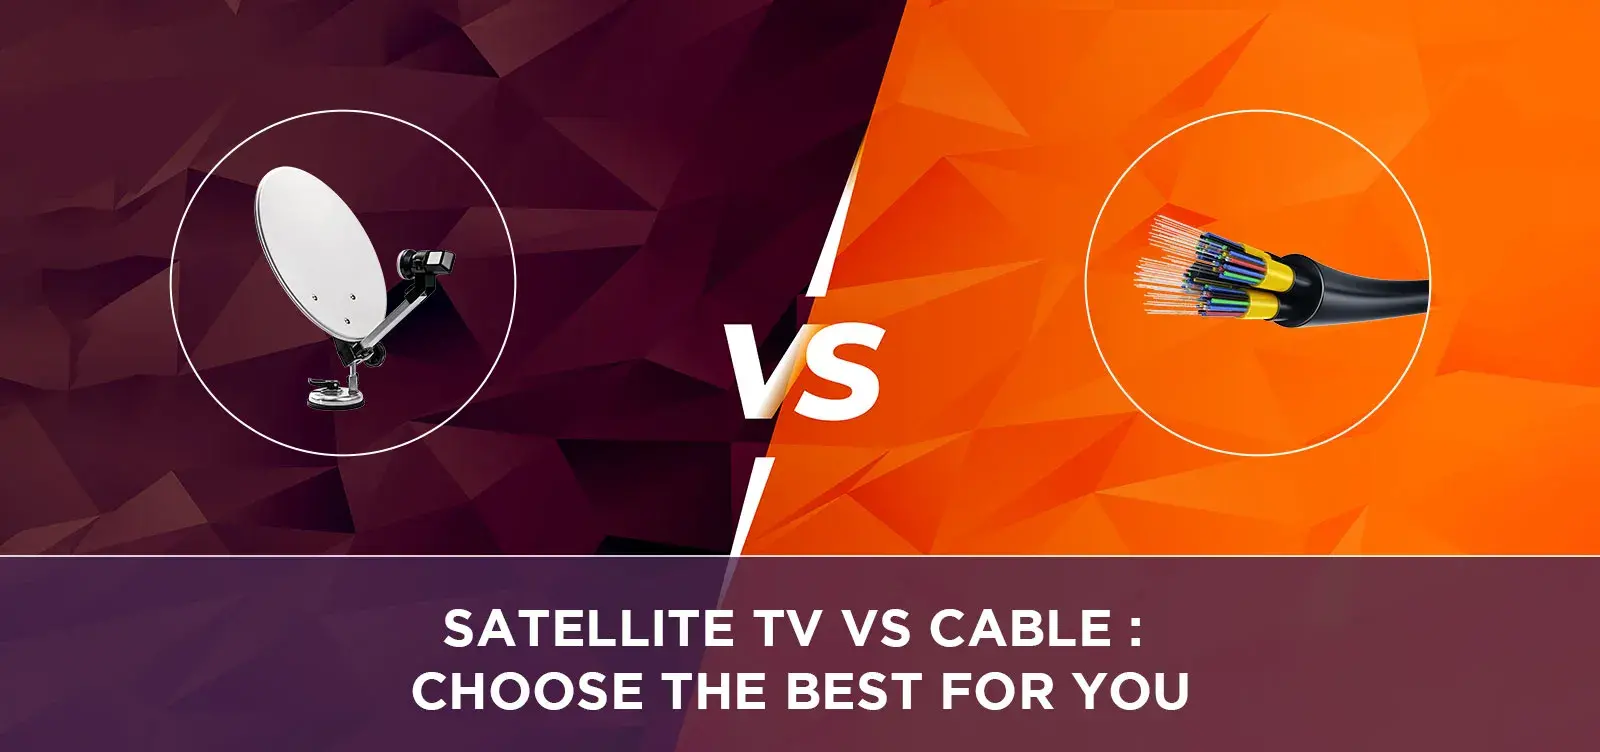 Satellite TV vs Cable: Choose the best for you